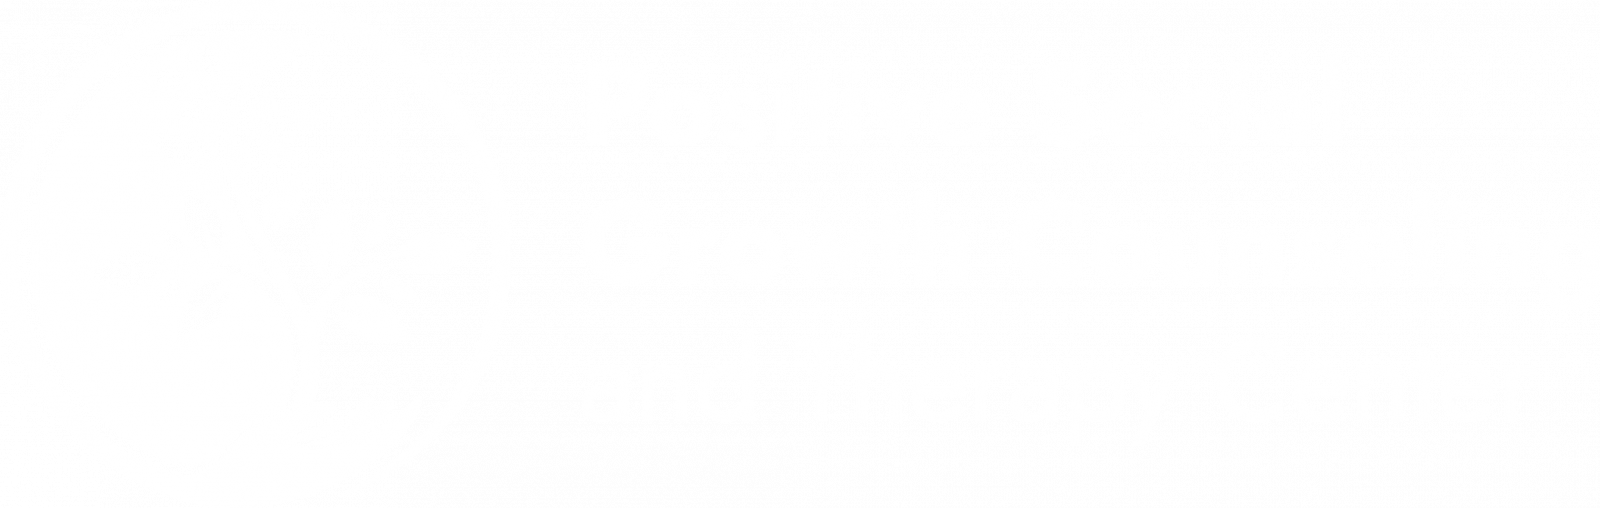 positive-social-growth-counseling-and-therapy-centre-logo-white